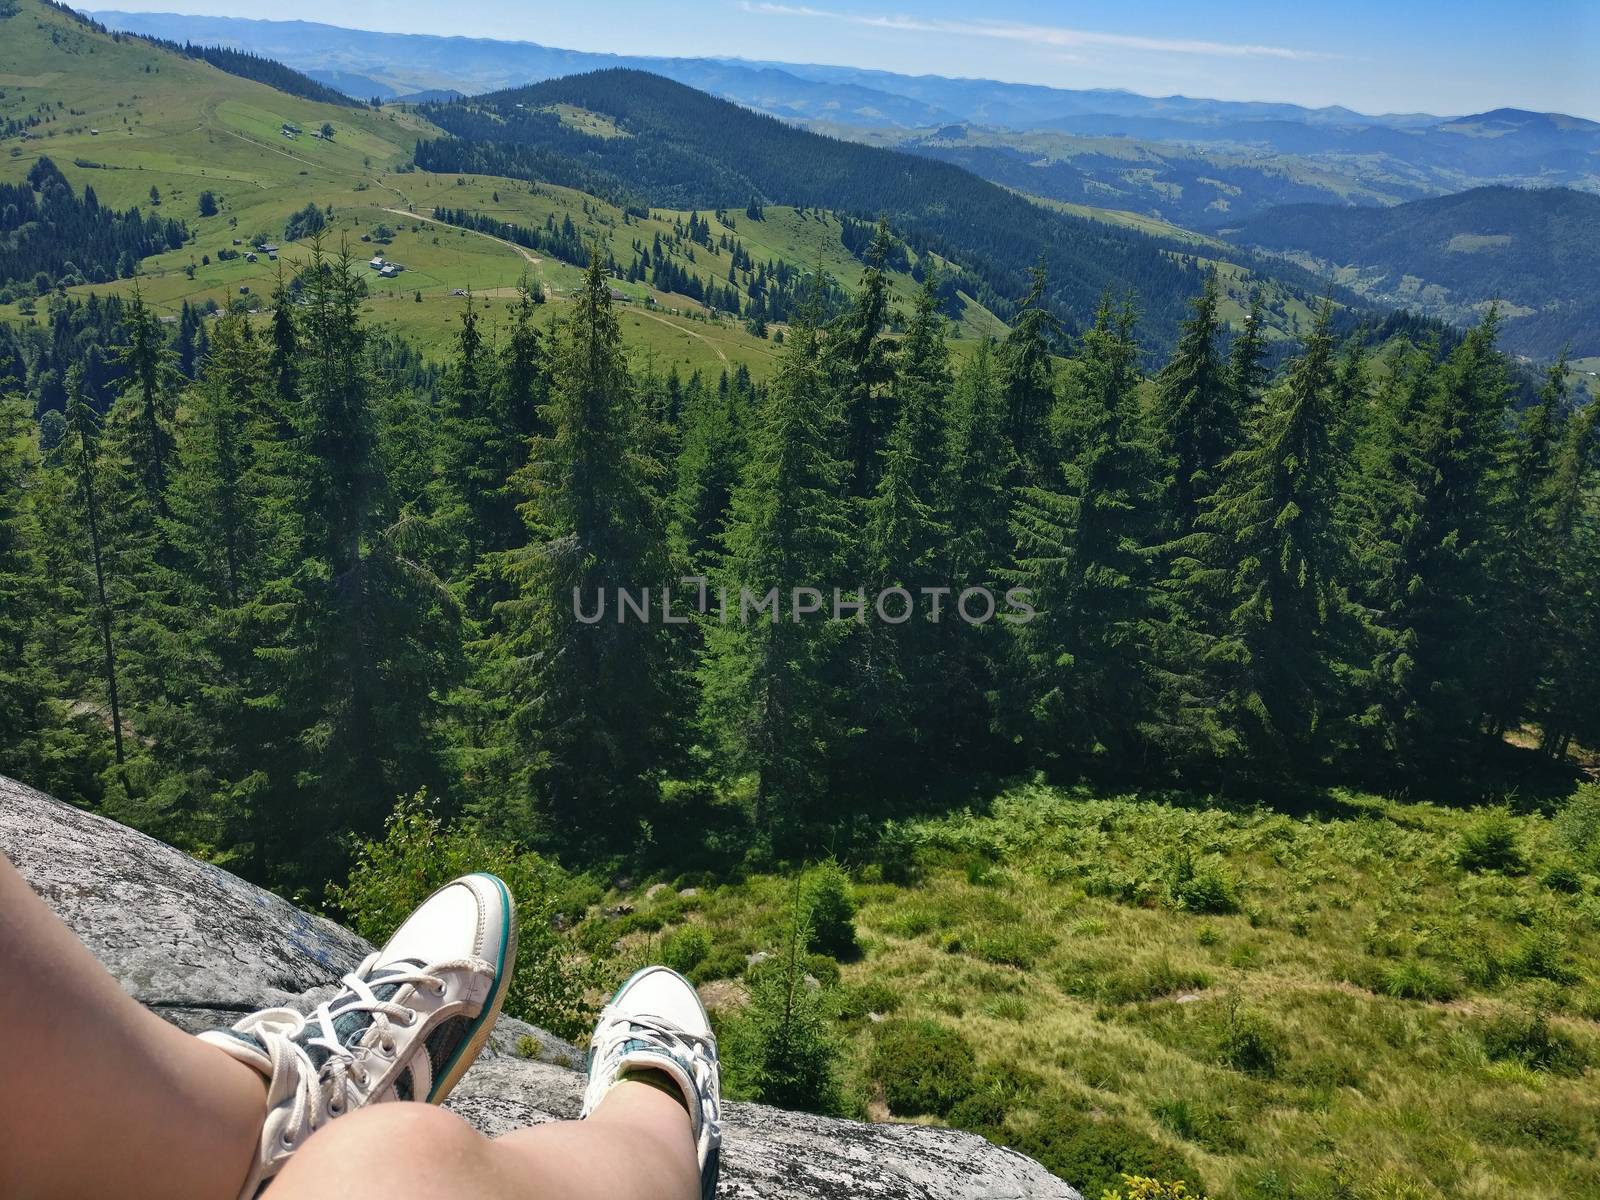 Legs of traveler sitting on a high mountain top in travel. Freedom concept